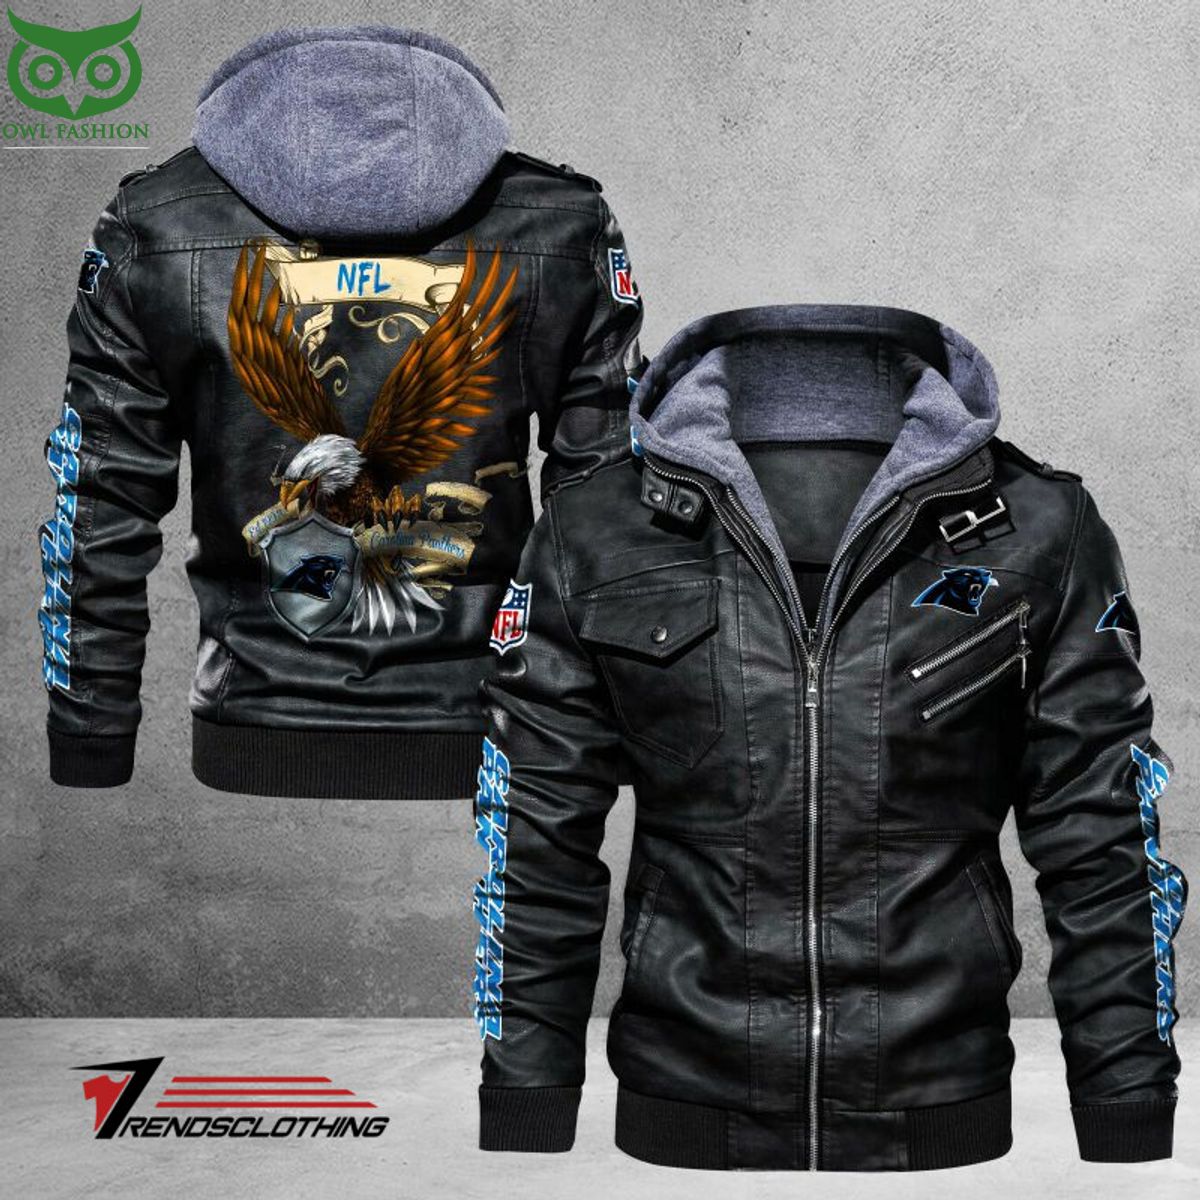 Carolina Panthers Trending 2D Leather Jacket Natural and awesome